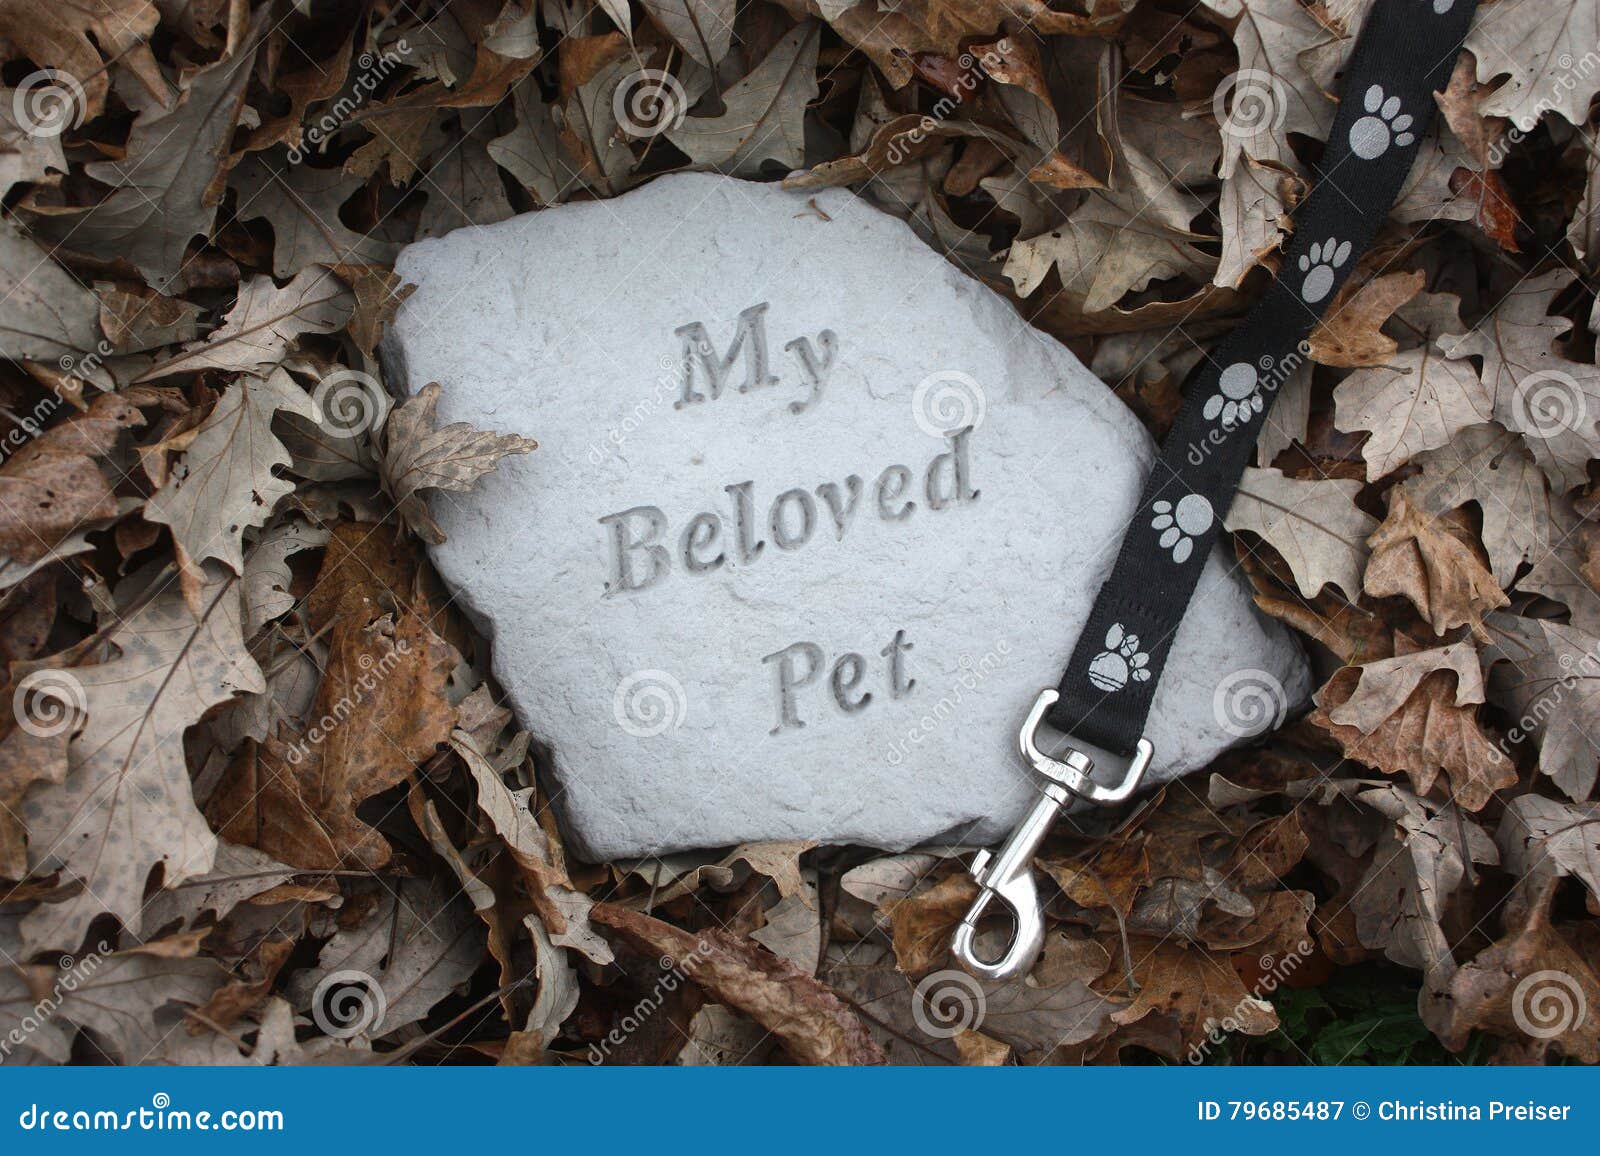 loss of a pet in fall